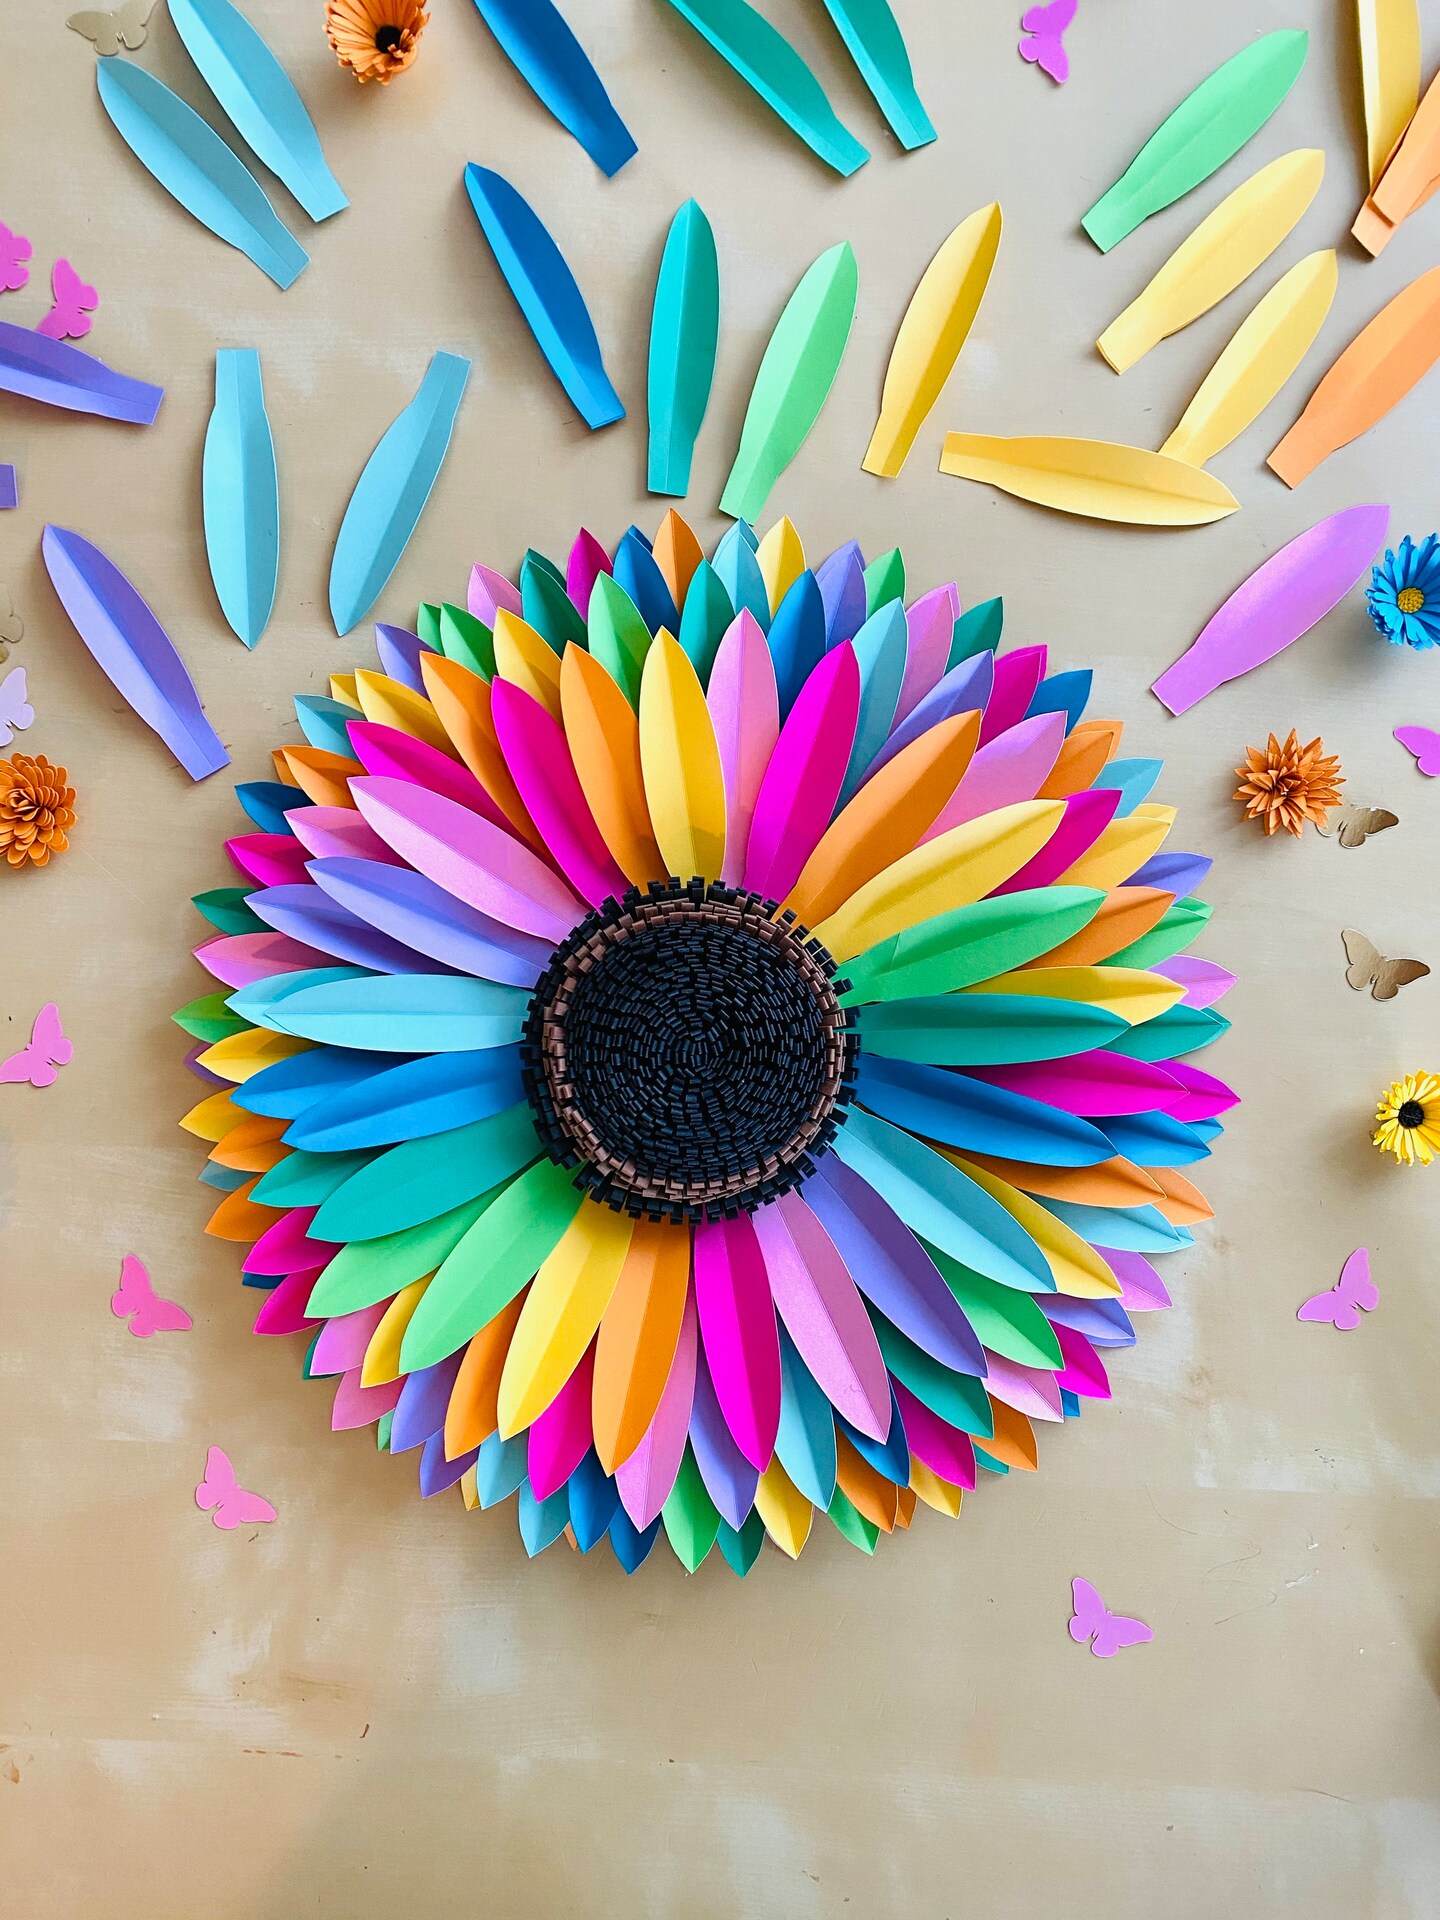 How to make easy rainbow paper flowers for kids  Paper flowers for kids,  Spring crafts for kids, Construction paper crafts